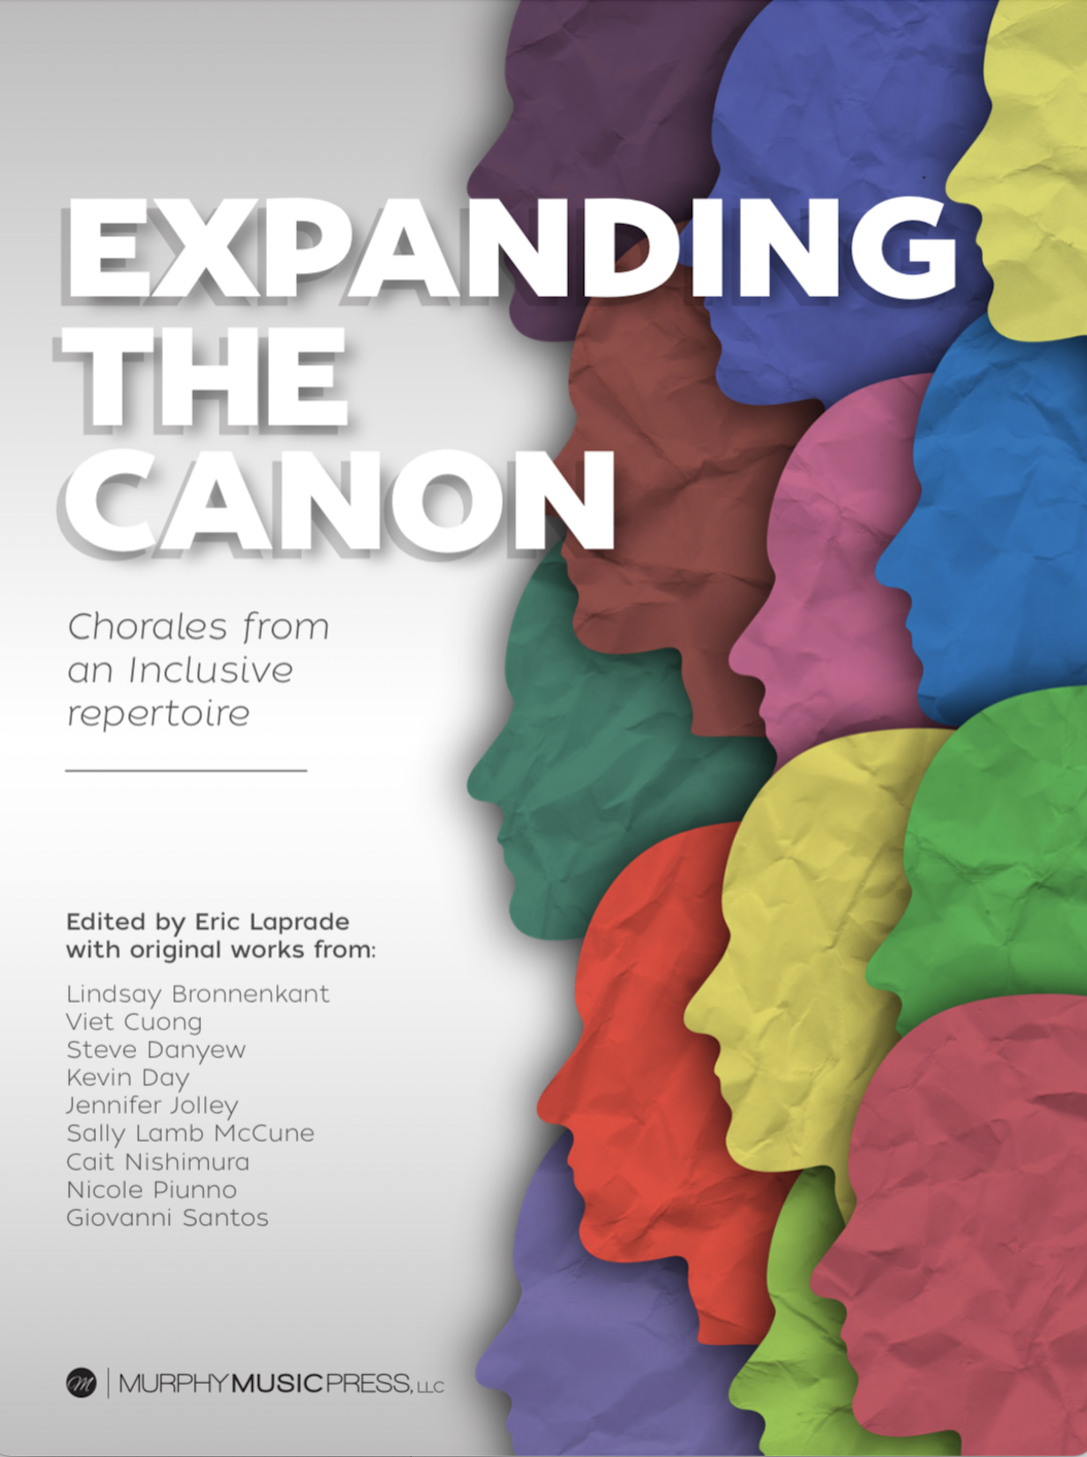 Expanding The Canon: Chorales From An Inclusive Repertoire by Eric Laprade